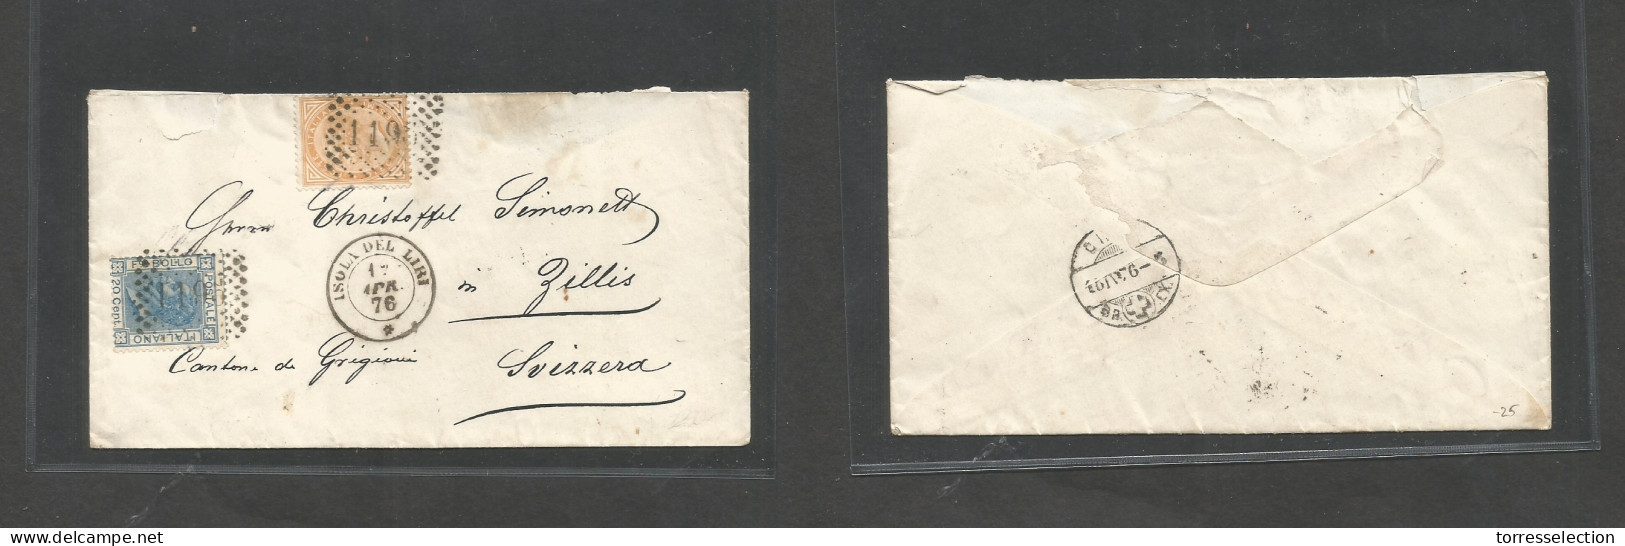 ITALY. 1876 (12 Apr) Isola Del Liri - Switzerland, Zillis, Canton Gigrioni ( Apr) Multifkd Env At C Rate. Nice Item + VF - Unclassified